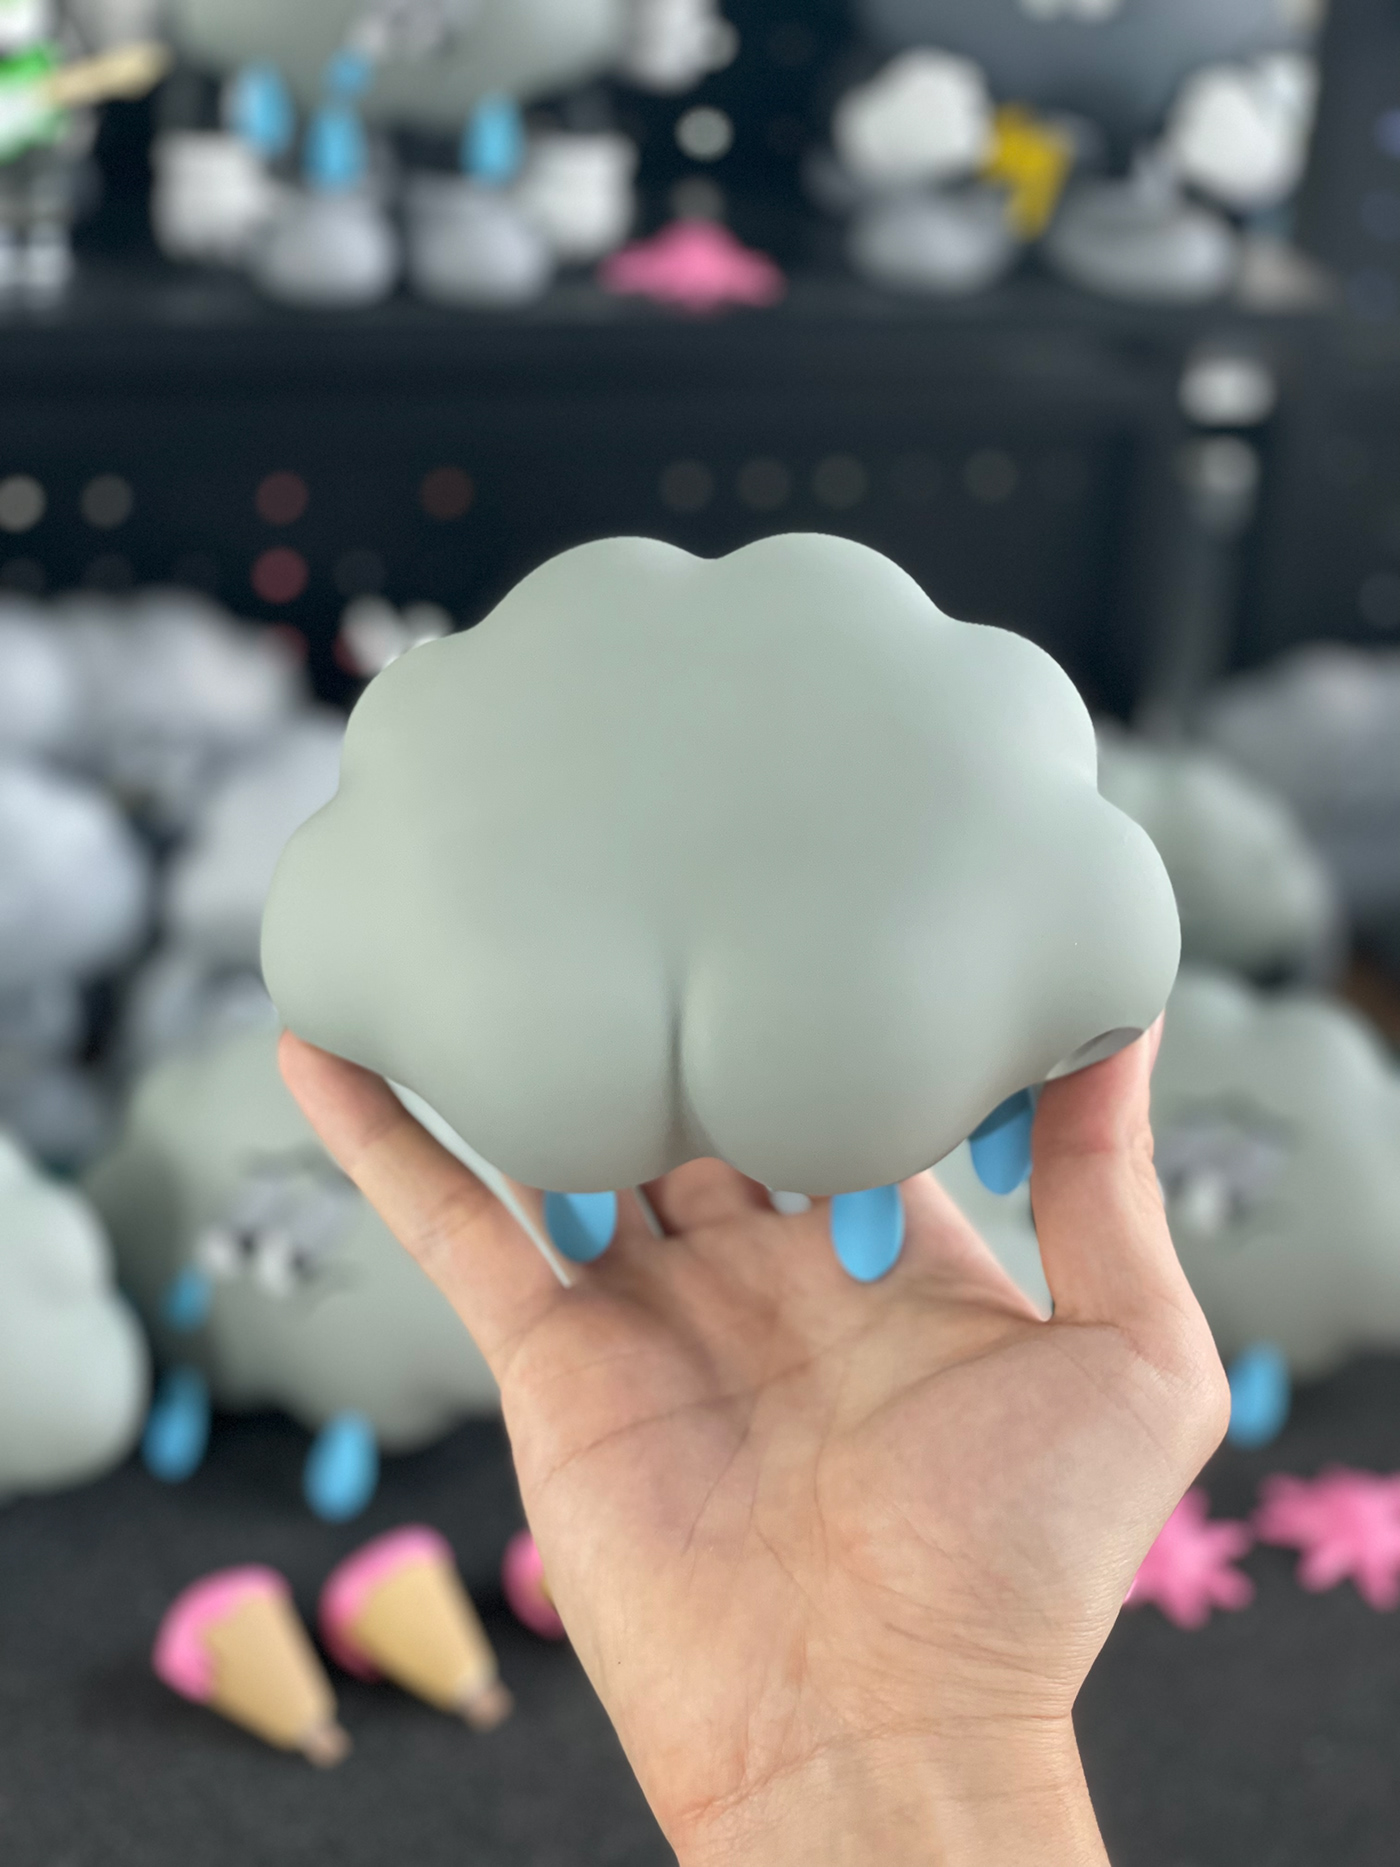 designertoy arttoys resintoy cloud weather Character emotion release kidult Collection figure